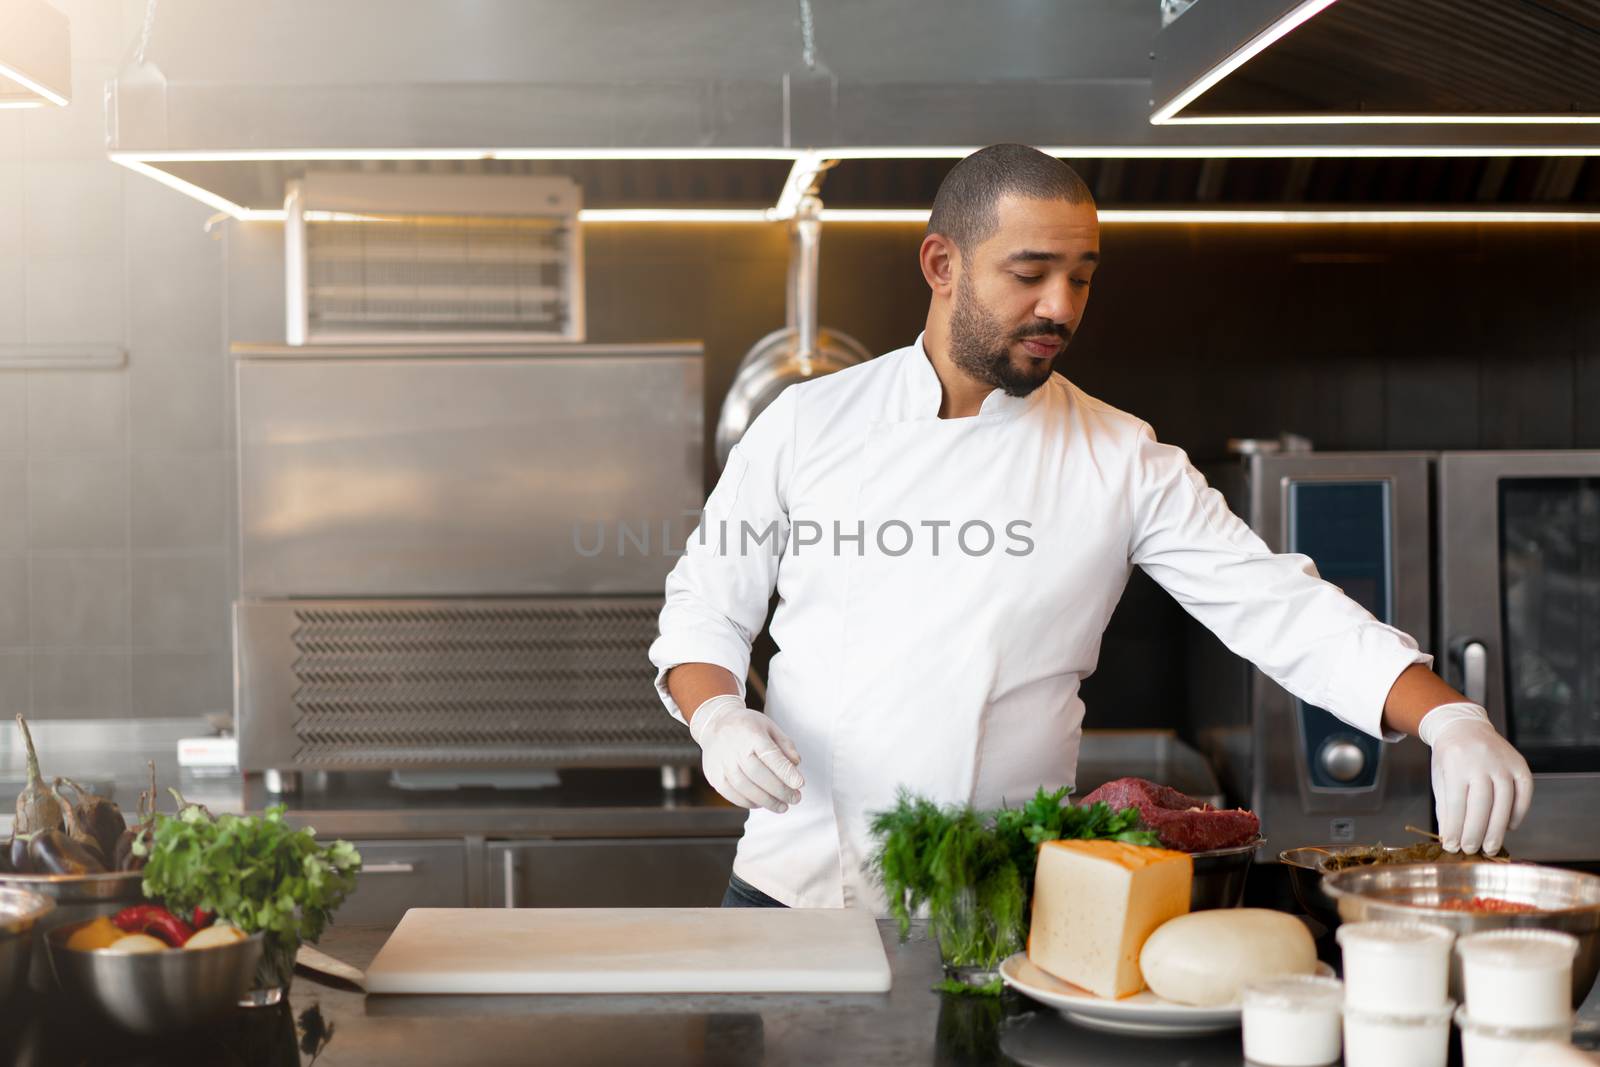 Handsome young African chef standing in professional kitchen in restaurant preparing a meal of meat and cheese vegetables. Portrait of man in cook uniform. Healthy eating concept.